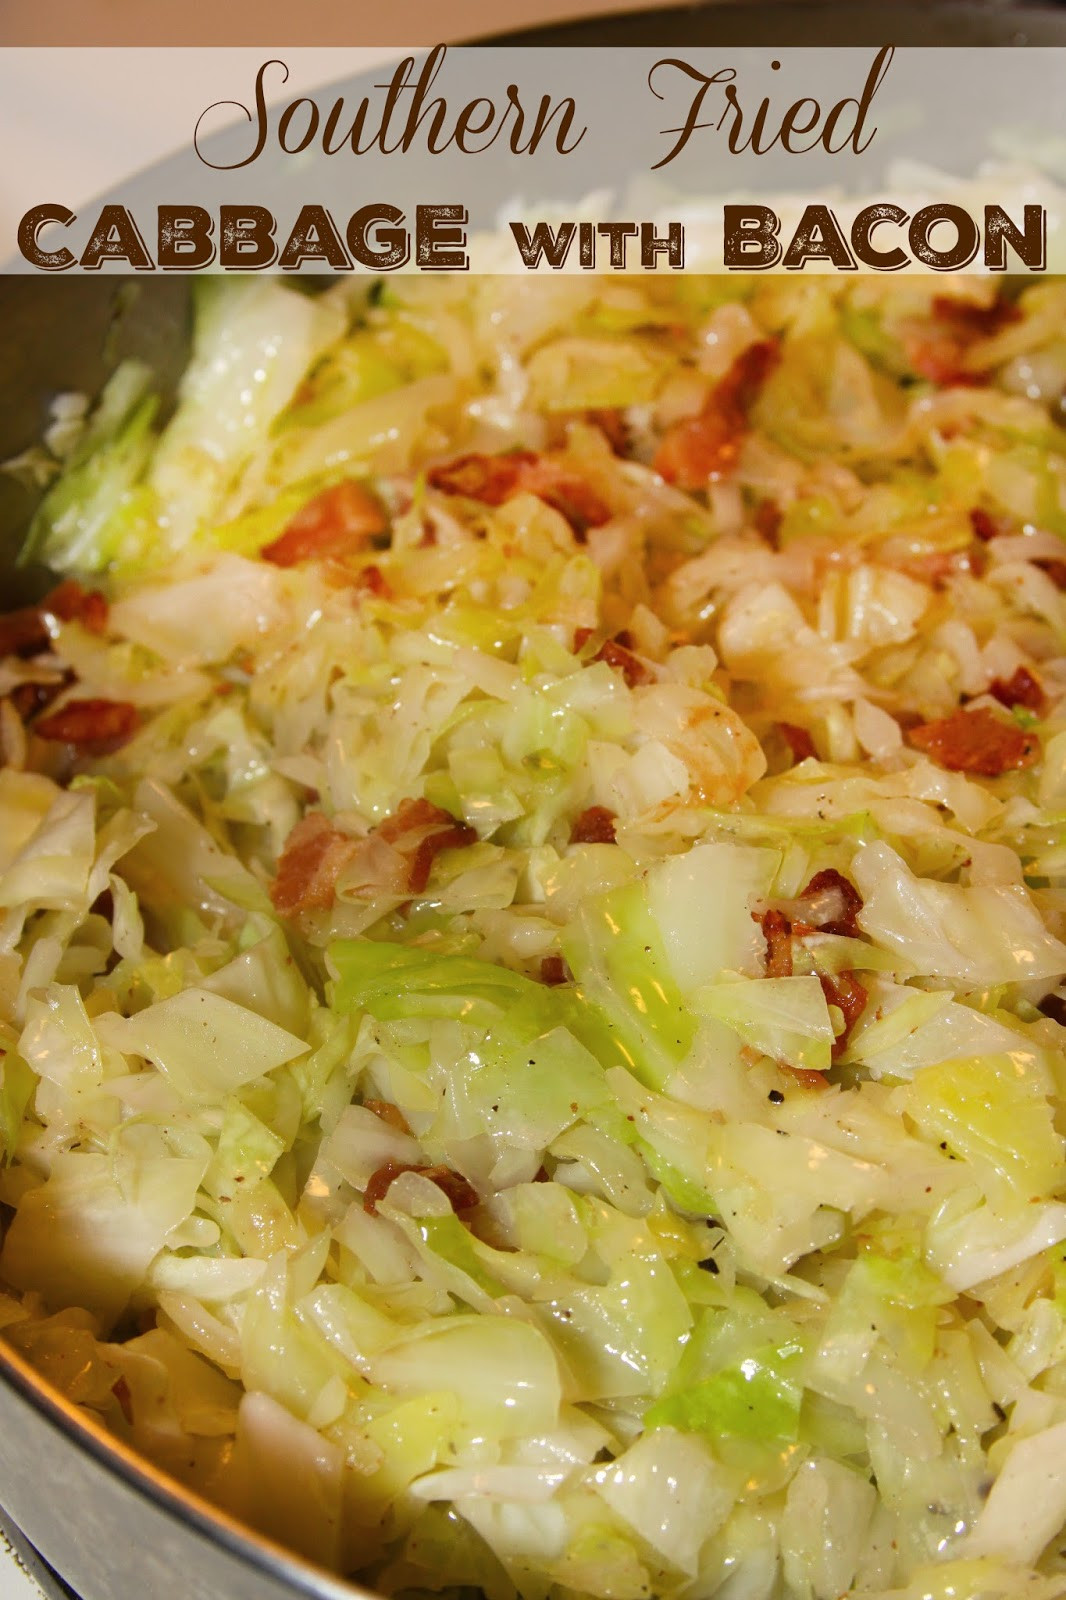 Cabbage New Years
 For the Love of Food New Year s Southern Fried Cabbage